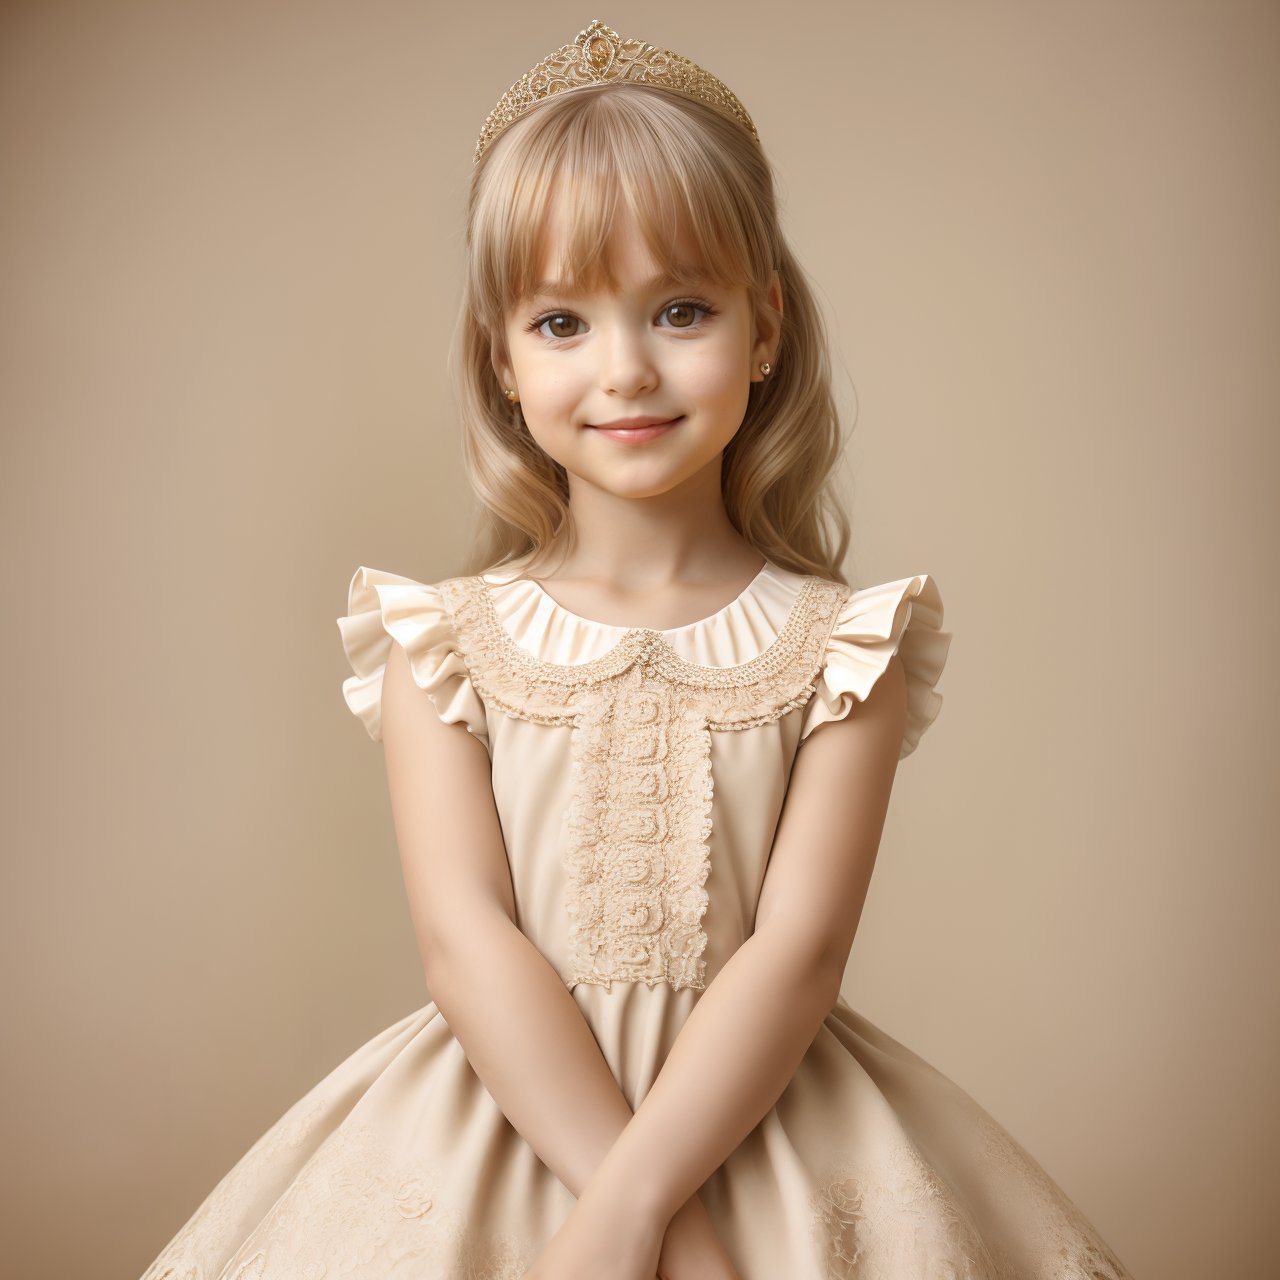 SFW, best quality, extra resolution, distant short of cute (AIDA_LoRA_AnC:1.04) <lora:AIDA_LoRA_AnC:0.77> posing for a picture on beige background, beige drape on the background, little girl, pretty face, beautiful child, Victorian dress with intricate pattern, tiara, naughty, funny, happy, playful, (elegant hands:1.1) with detailed fingers, insane level of details, getty images